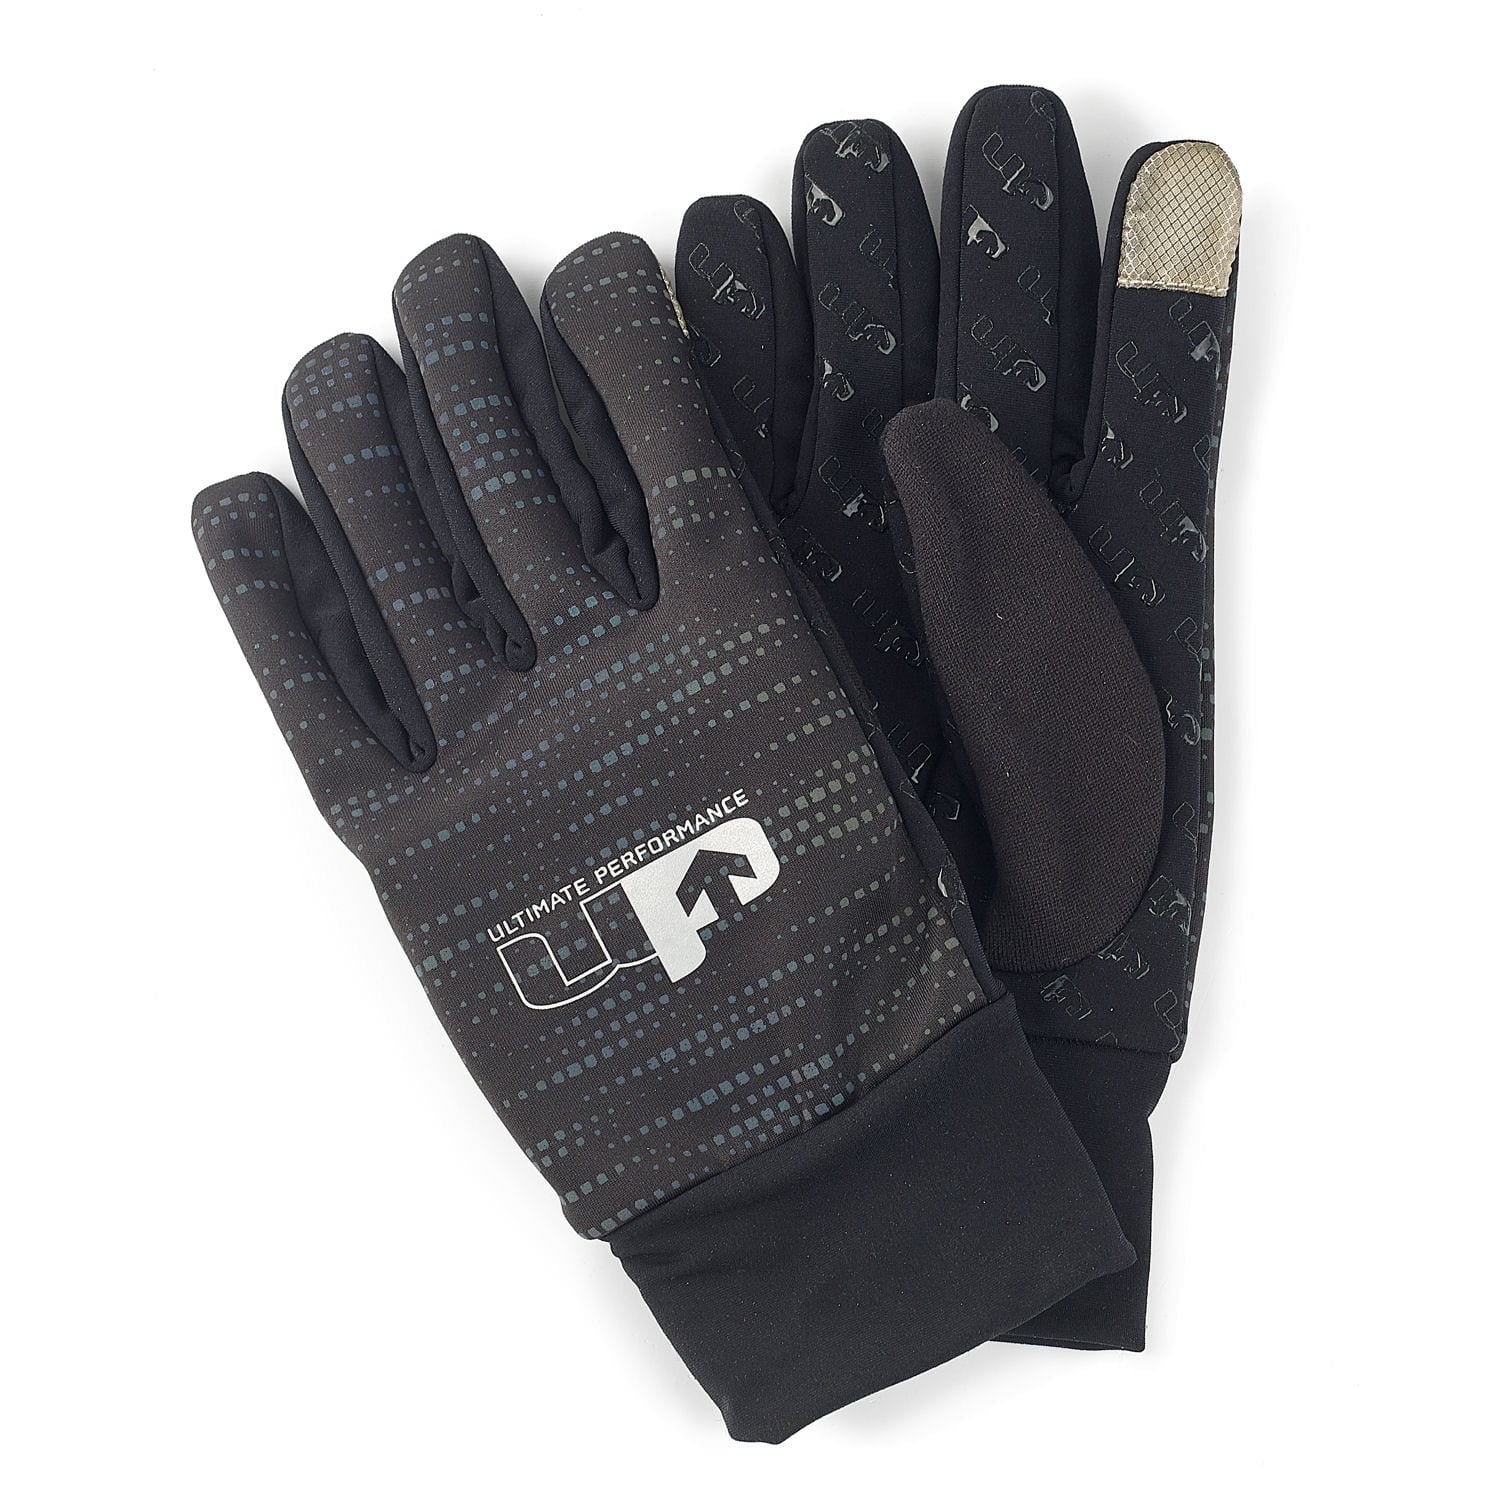 Ultimate Performance Reflective Gloves